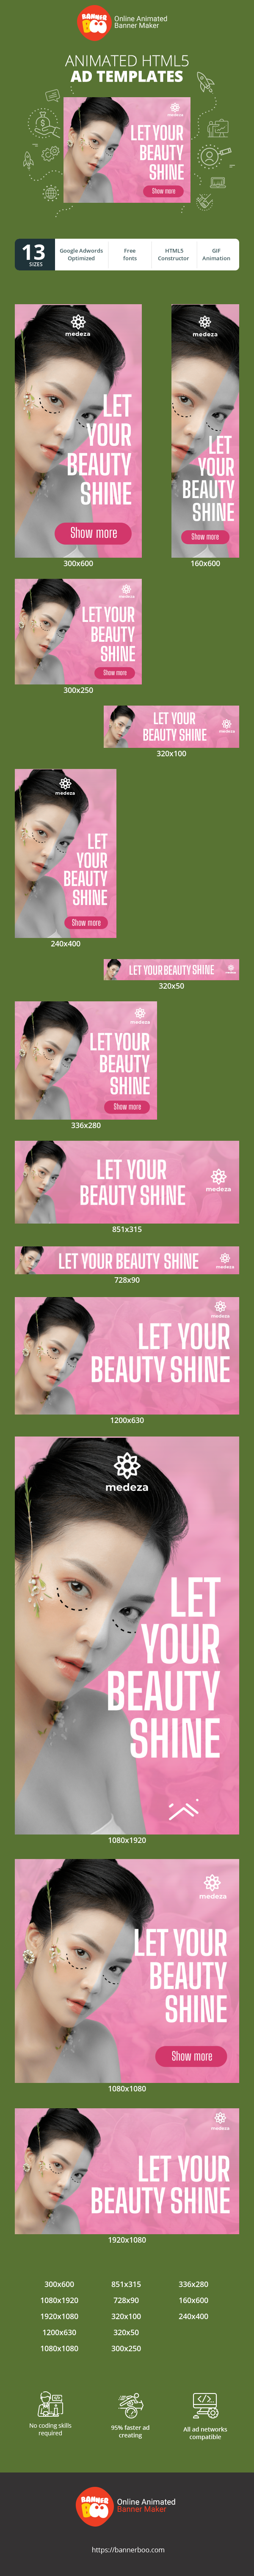 Banner ad template — Let Your Beauty Shine  — Plastic Surgery